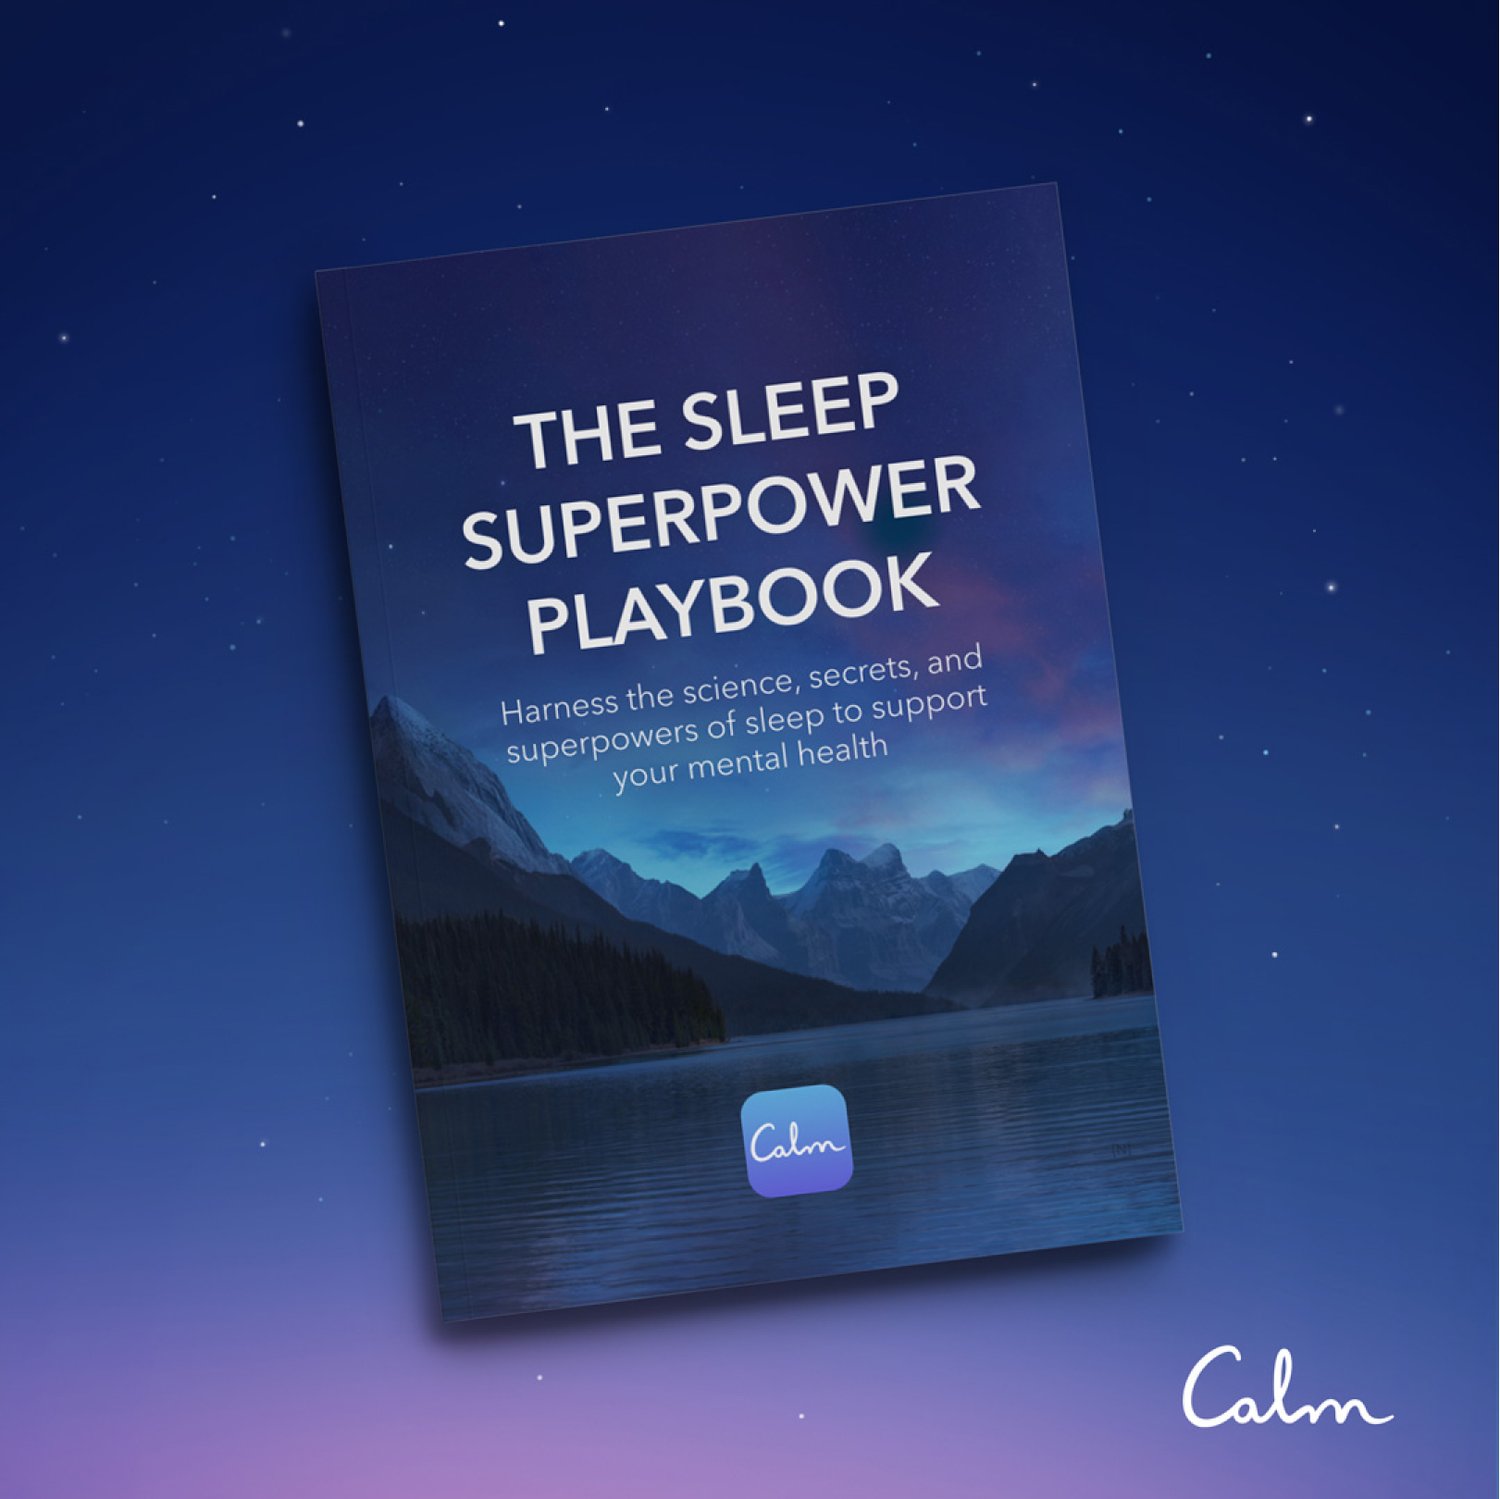 Harness The Secrets and techniques, Science & Superpowers of Sleep To Assistance Your Mental Health — Calm Blog site